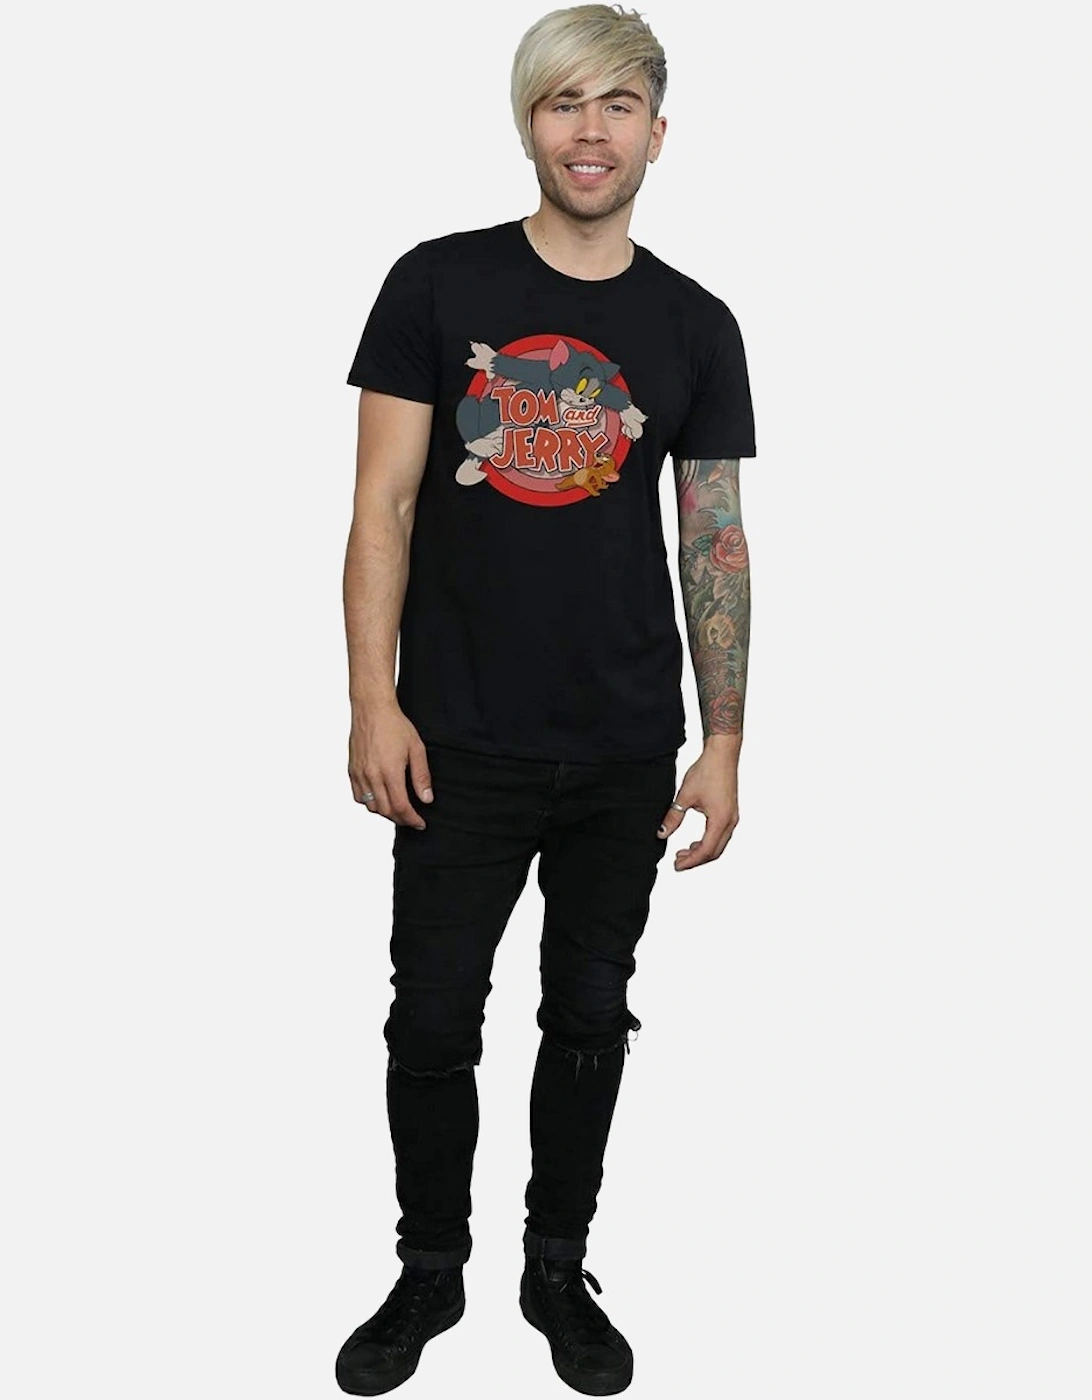 Tom and Jerry Mens Catch Cotton T-Shirt